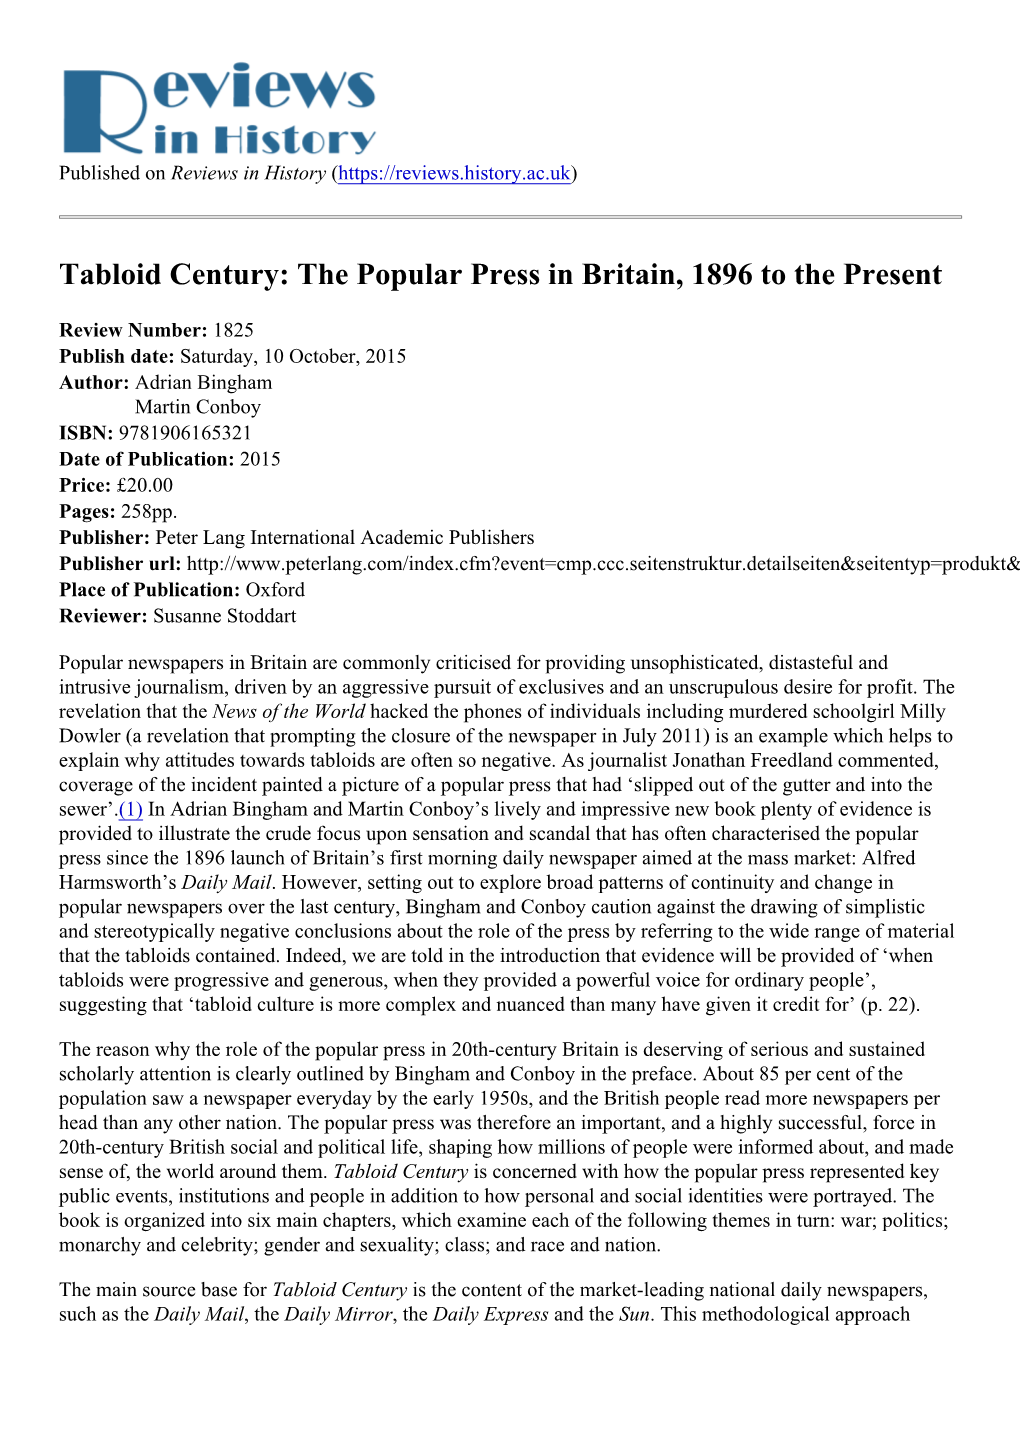 Tabloid Century: the Popular Press in Britain, 1896 to the Present